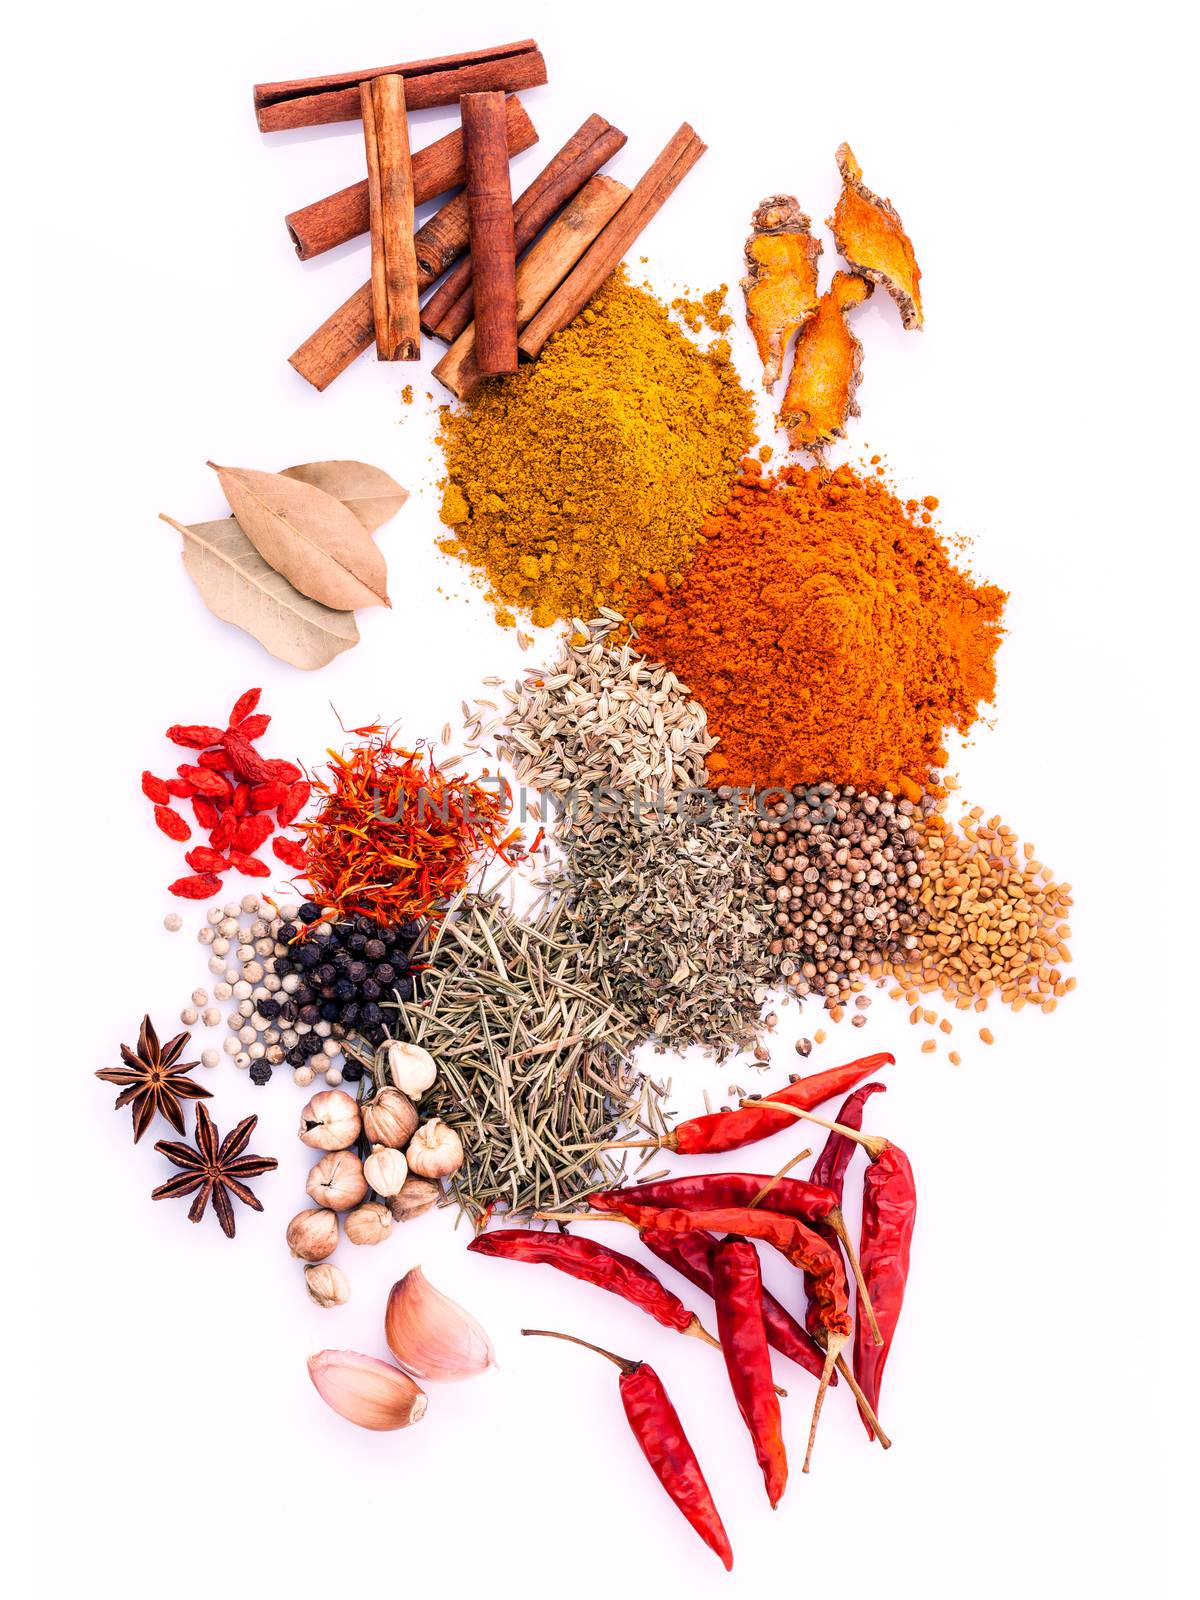 Assorted of spices black pepper ,white pepper,fenugreek,cumin ,bay leaf ,cinnamon,thyme,matrimony vine(chinese wolfberry),safflower,rosemary and fennel seeds isolated on white background.